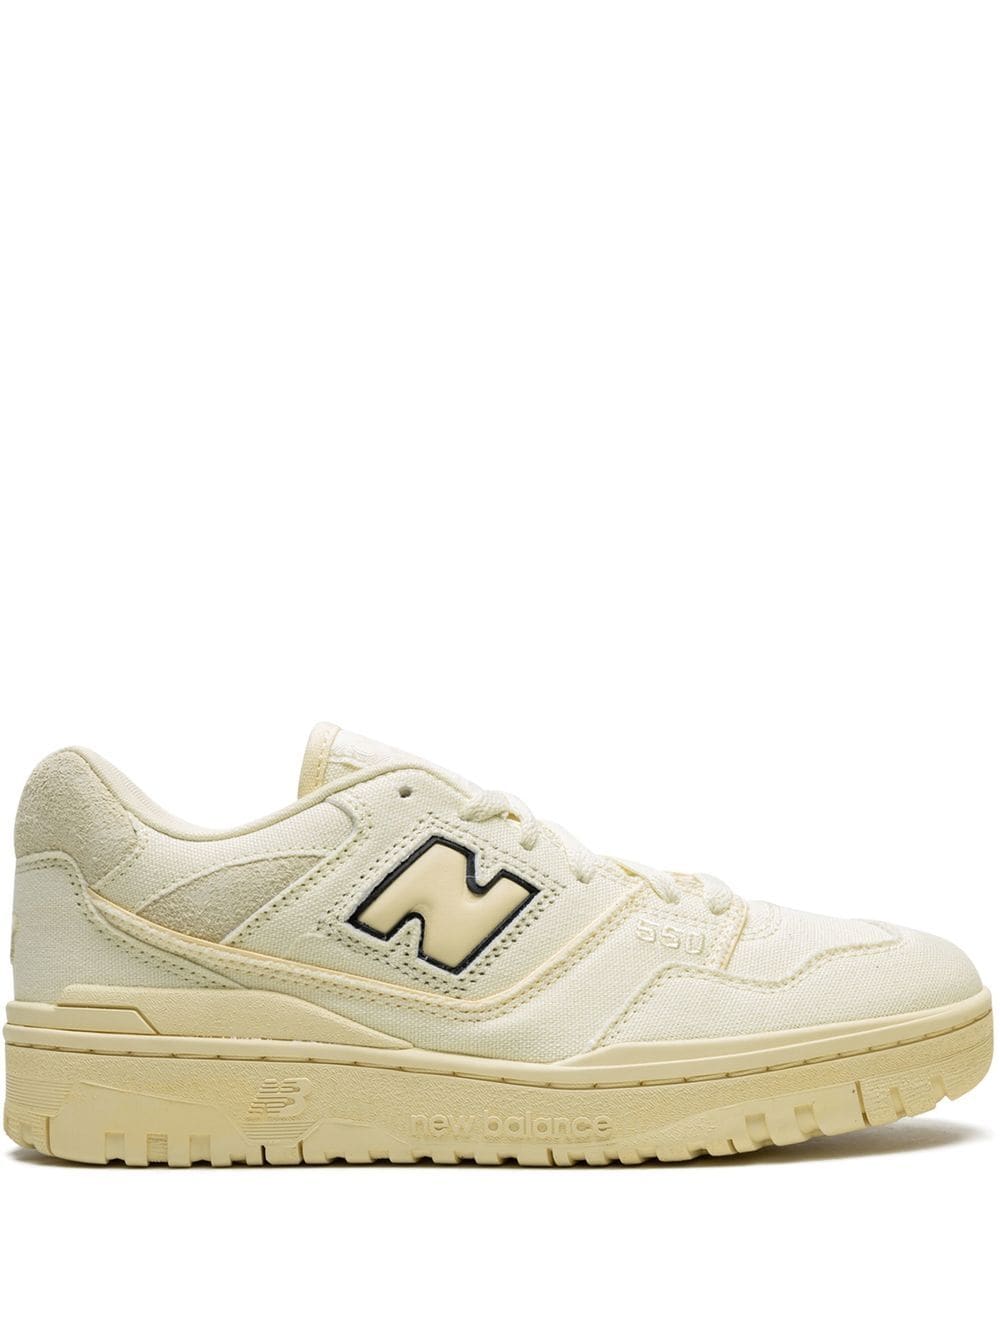 New Balance 550 low-top sneakers - Neutrals